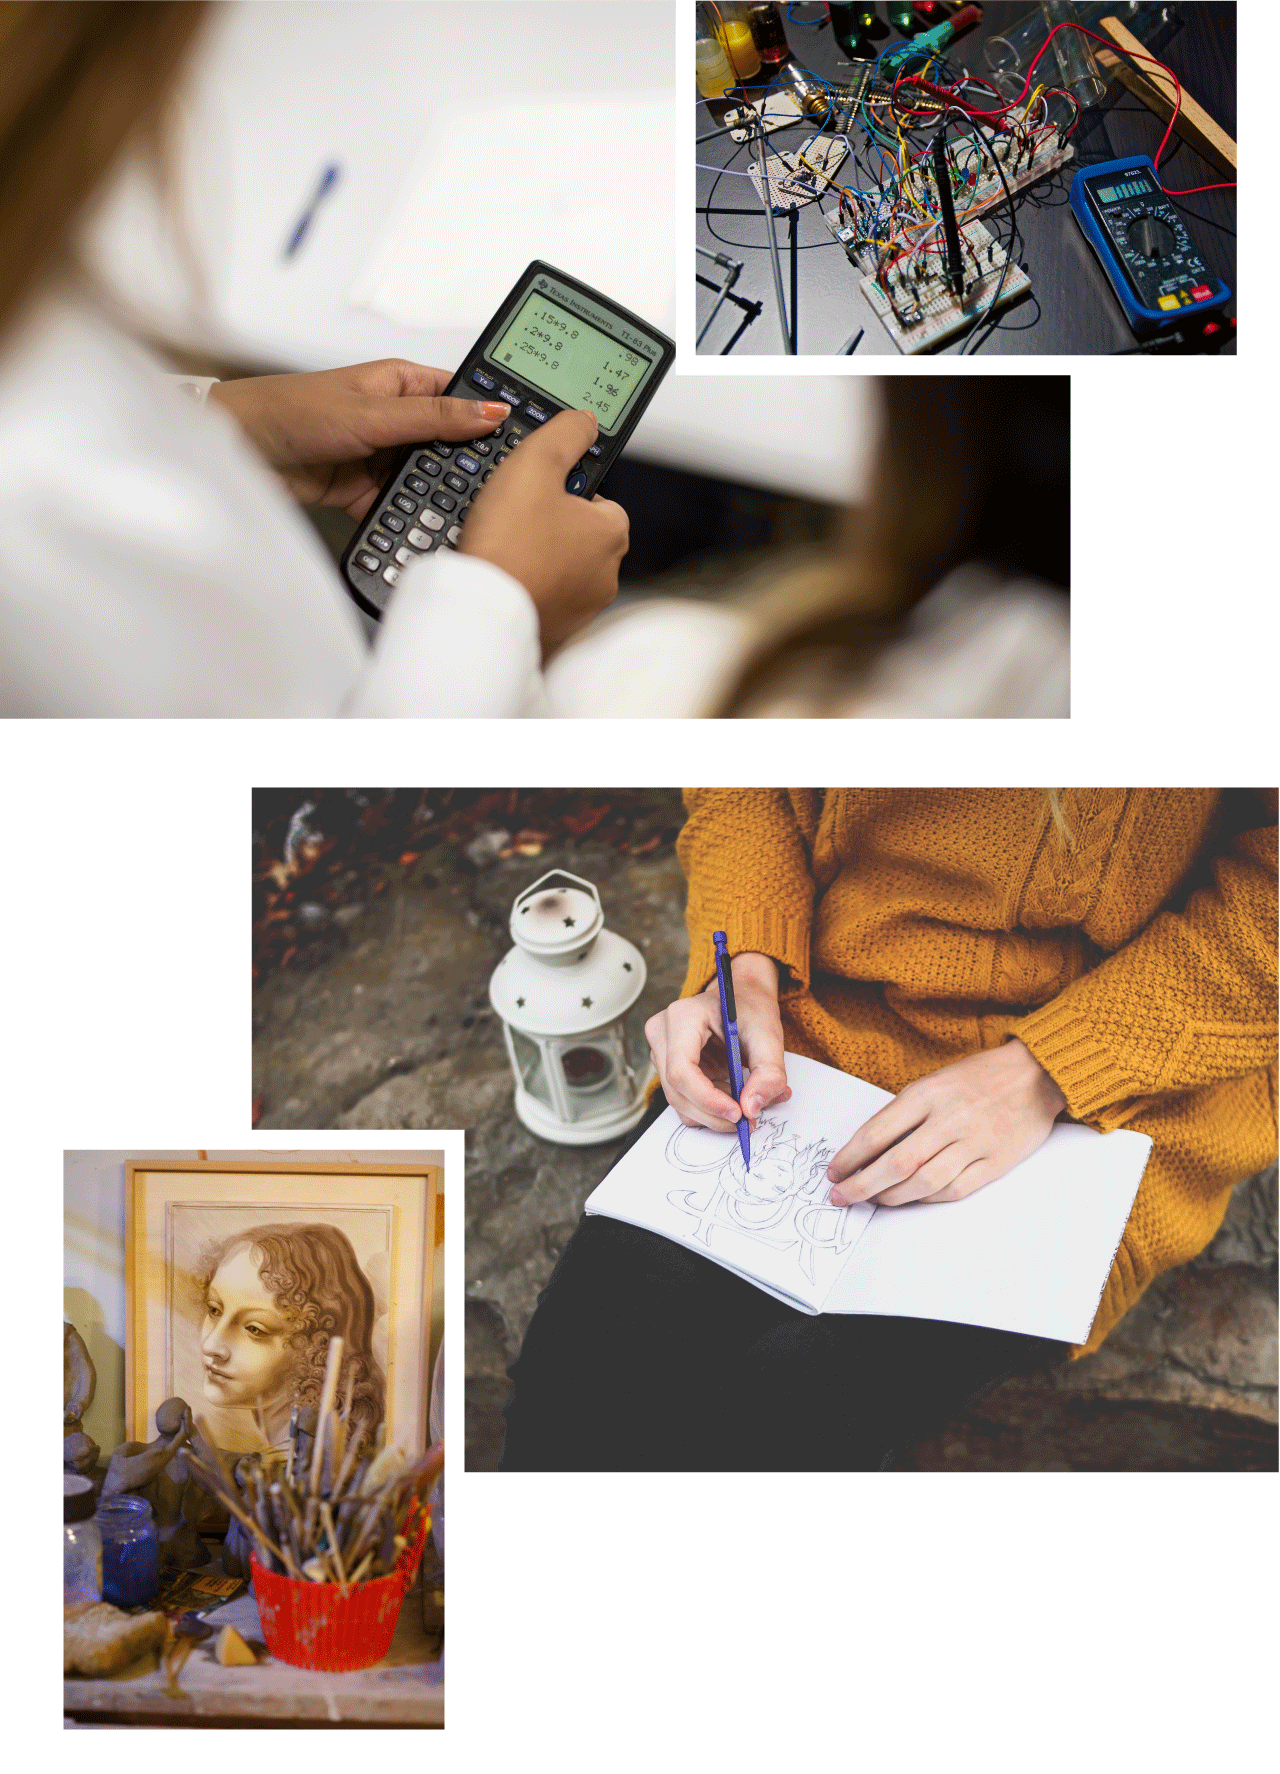 A collage of four images: 1) A student working on a calculator 2) A series of wires running into a board 3) Someone sketching in a sketchbook 3) A collection of art supplies seated on a shelf